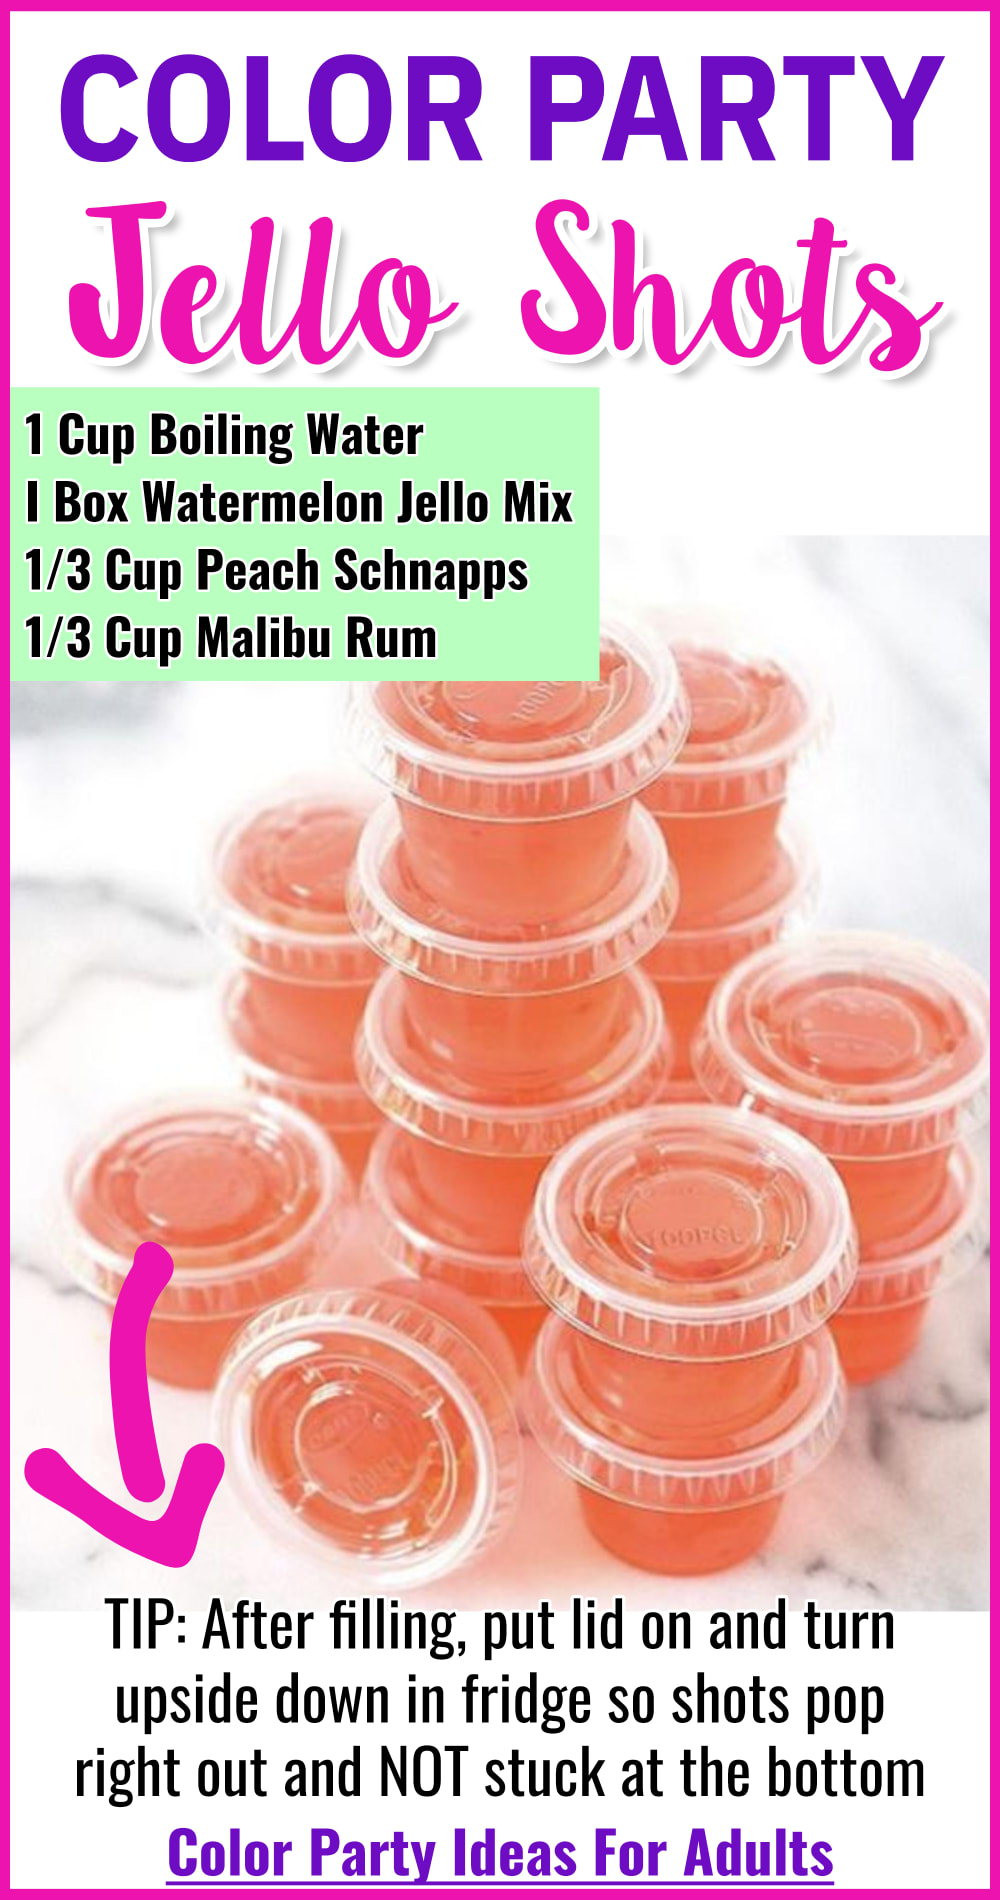 color party ideas for adults - Jello shots for an orange color party - just change the Jello mix color for YOUR party theme color